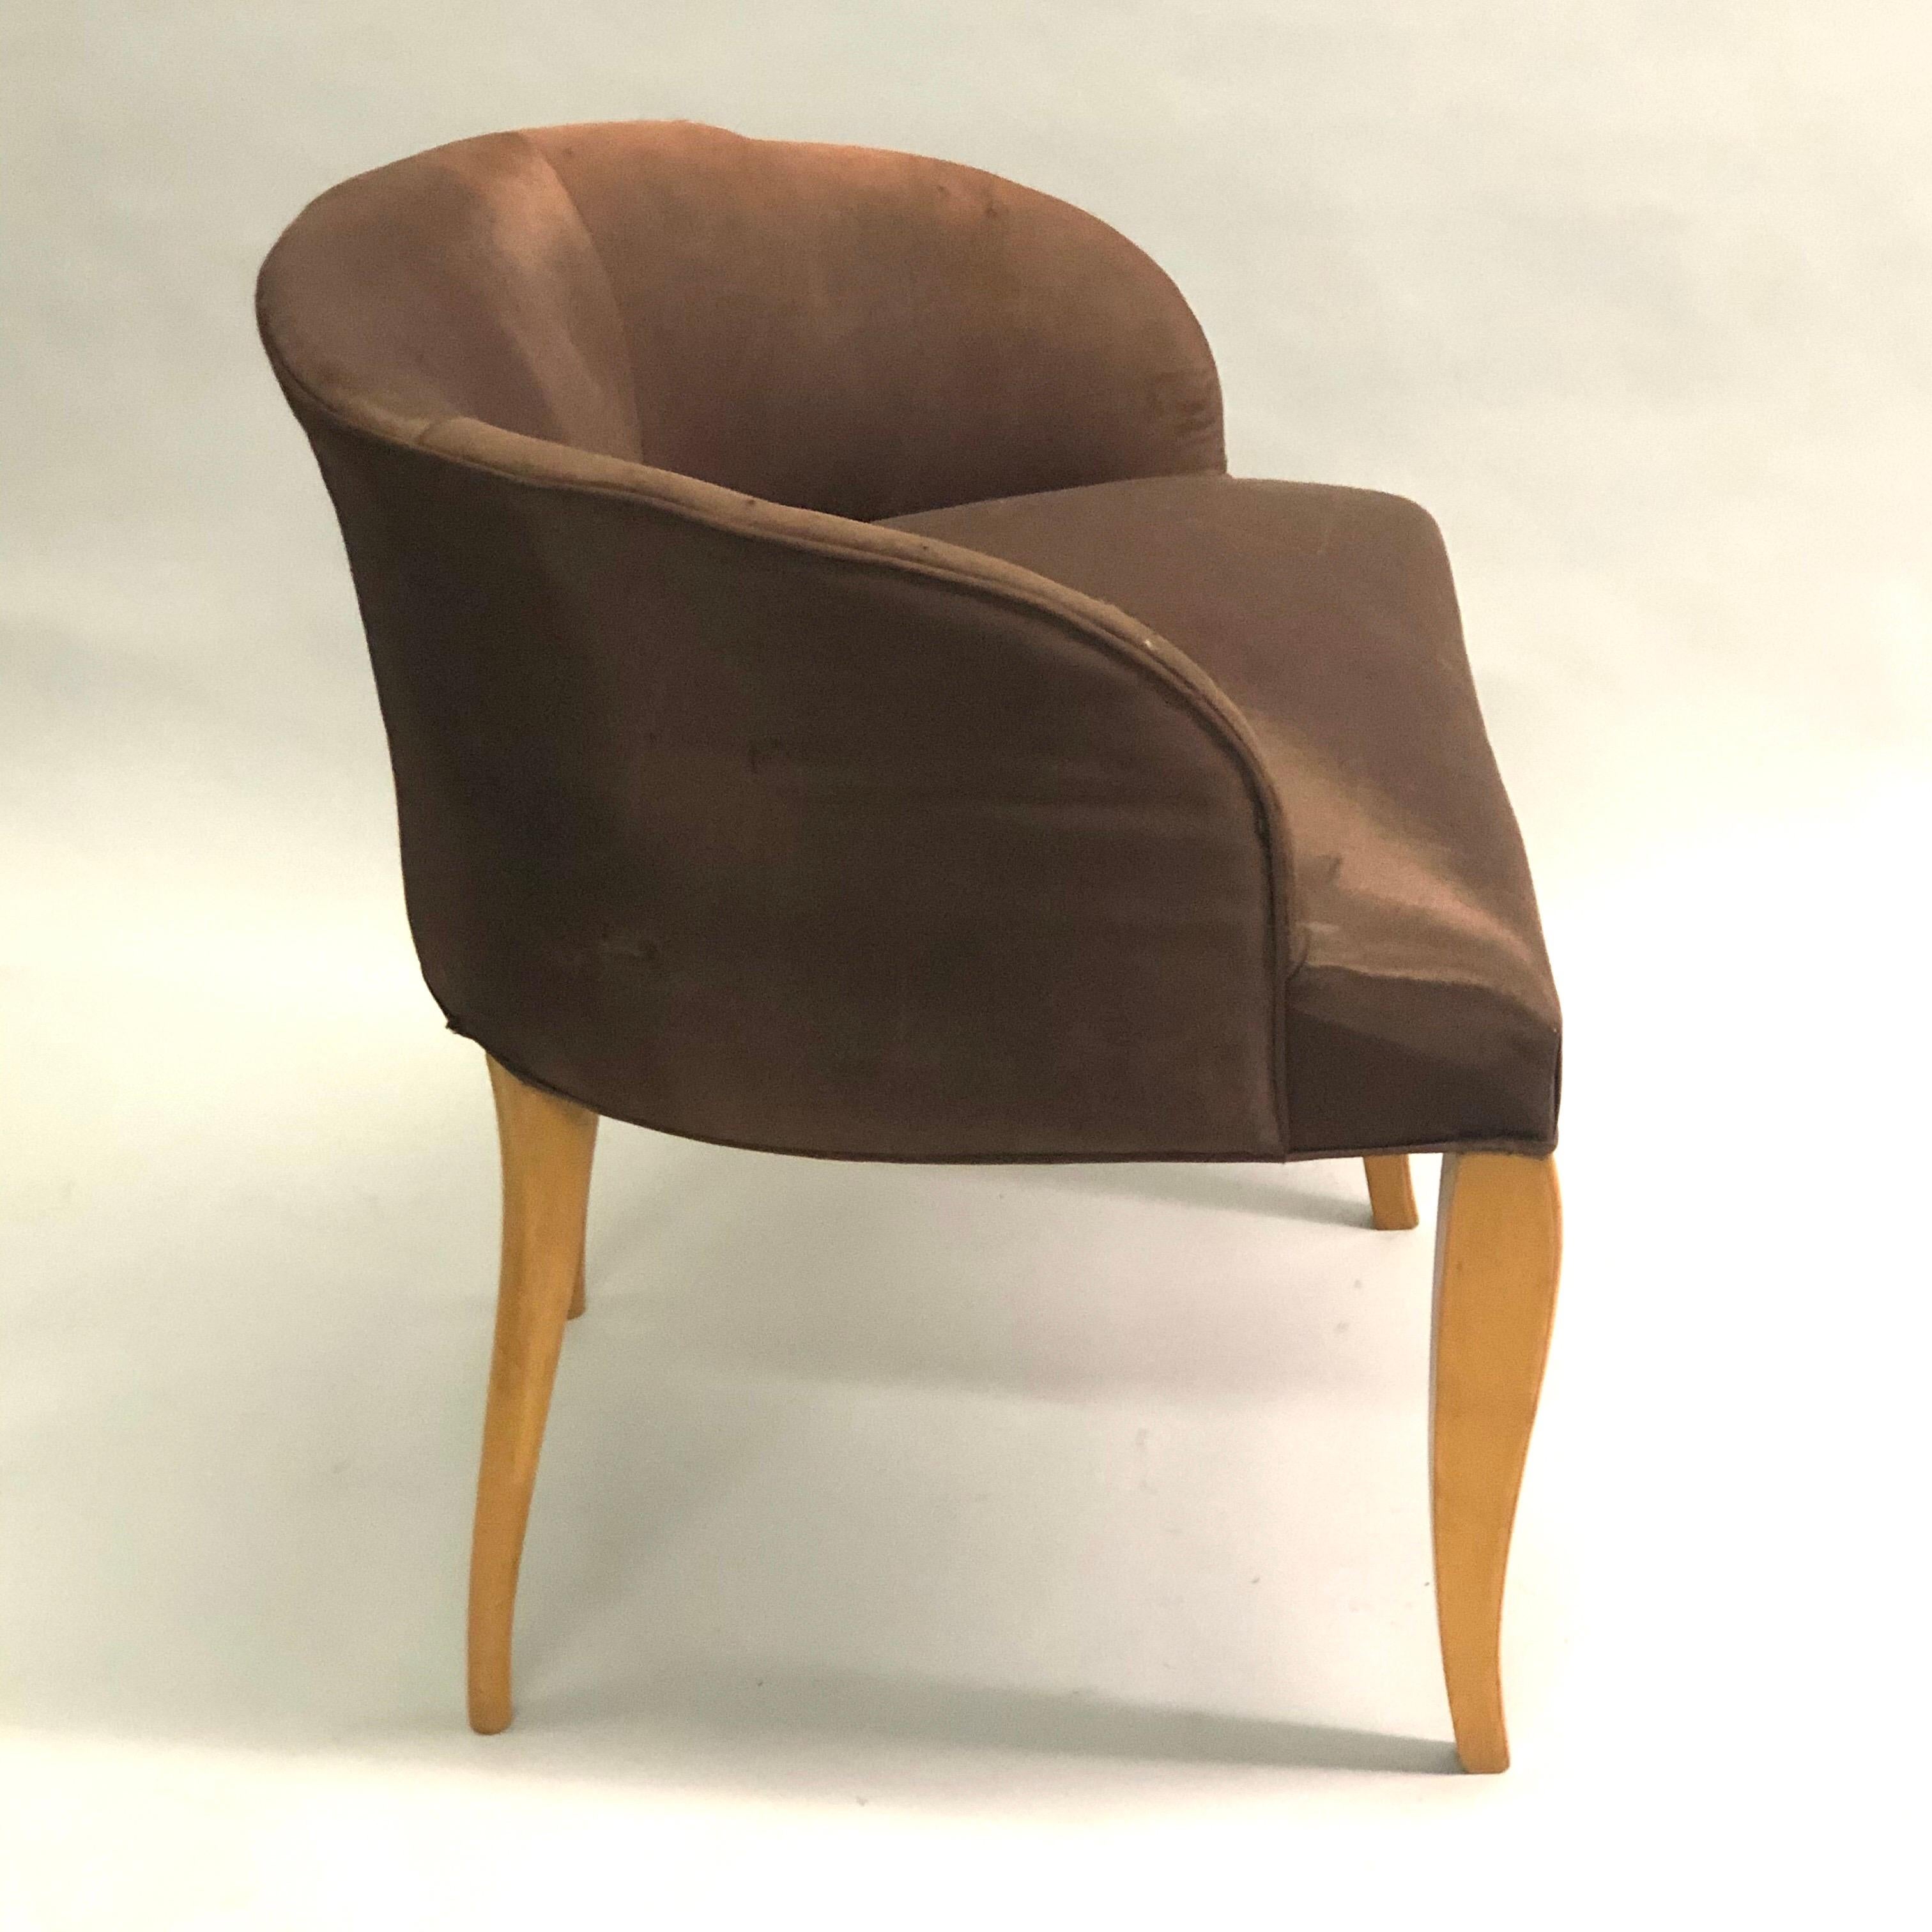 French / Belgian Art Deco Vanity Chair by Van der Borcht Freres, 1925-1930 For Sale 5